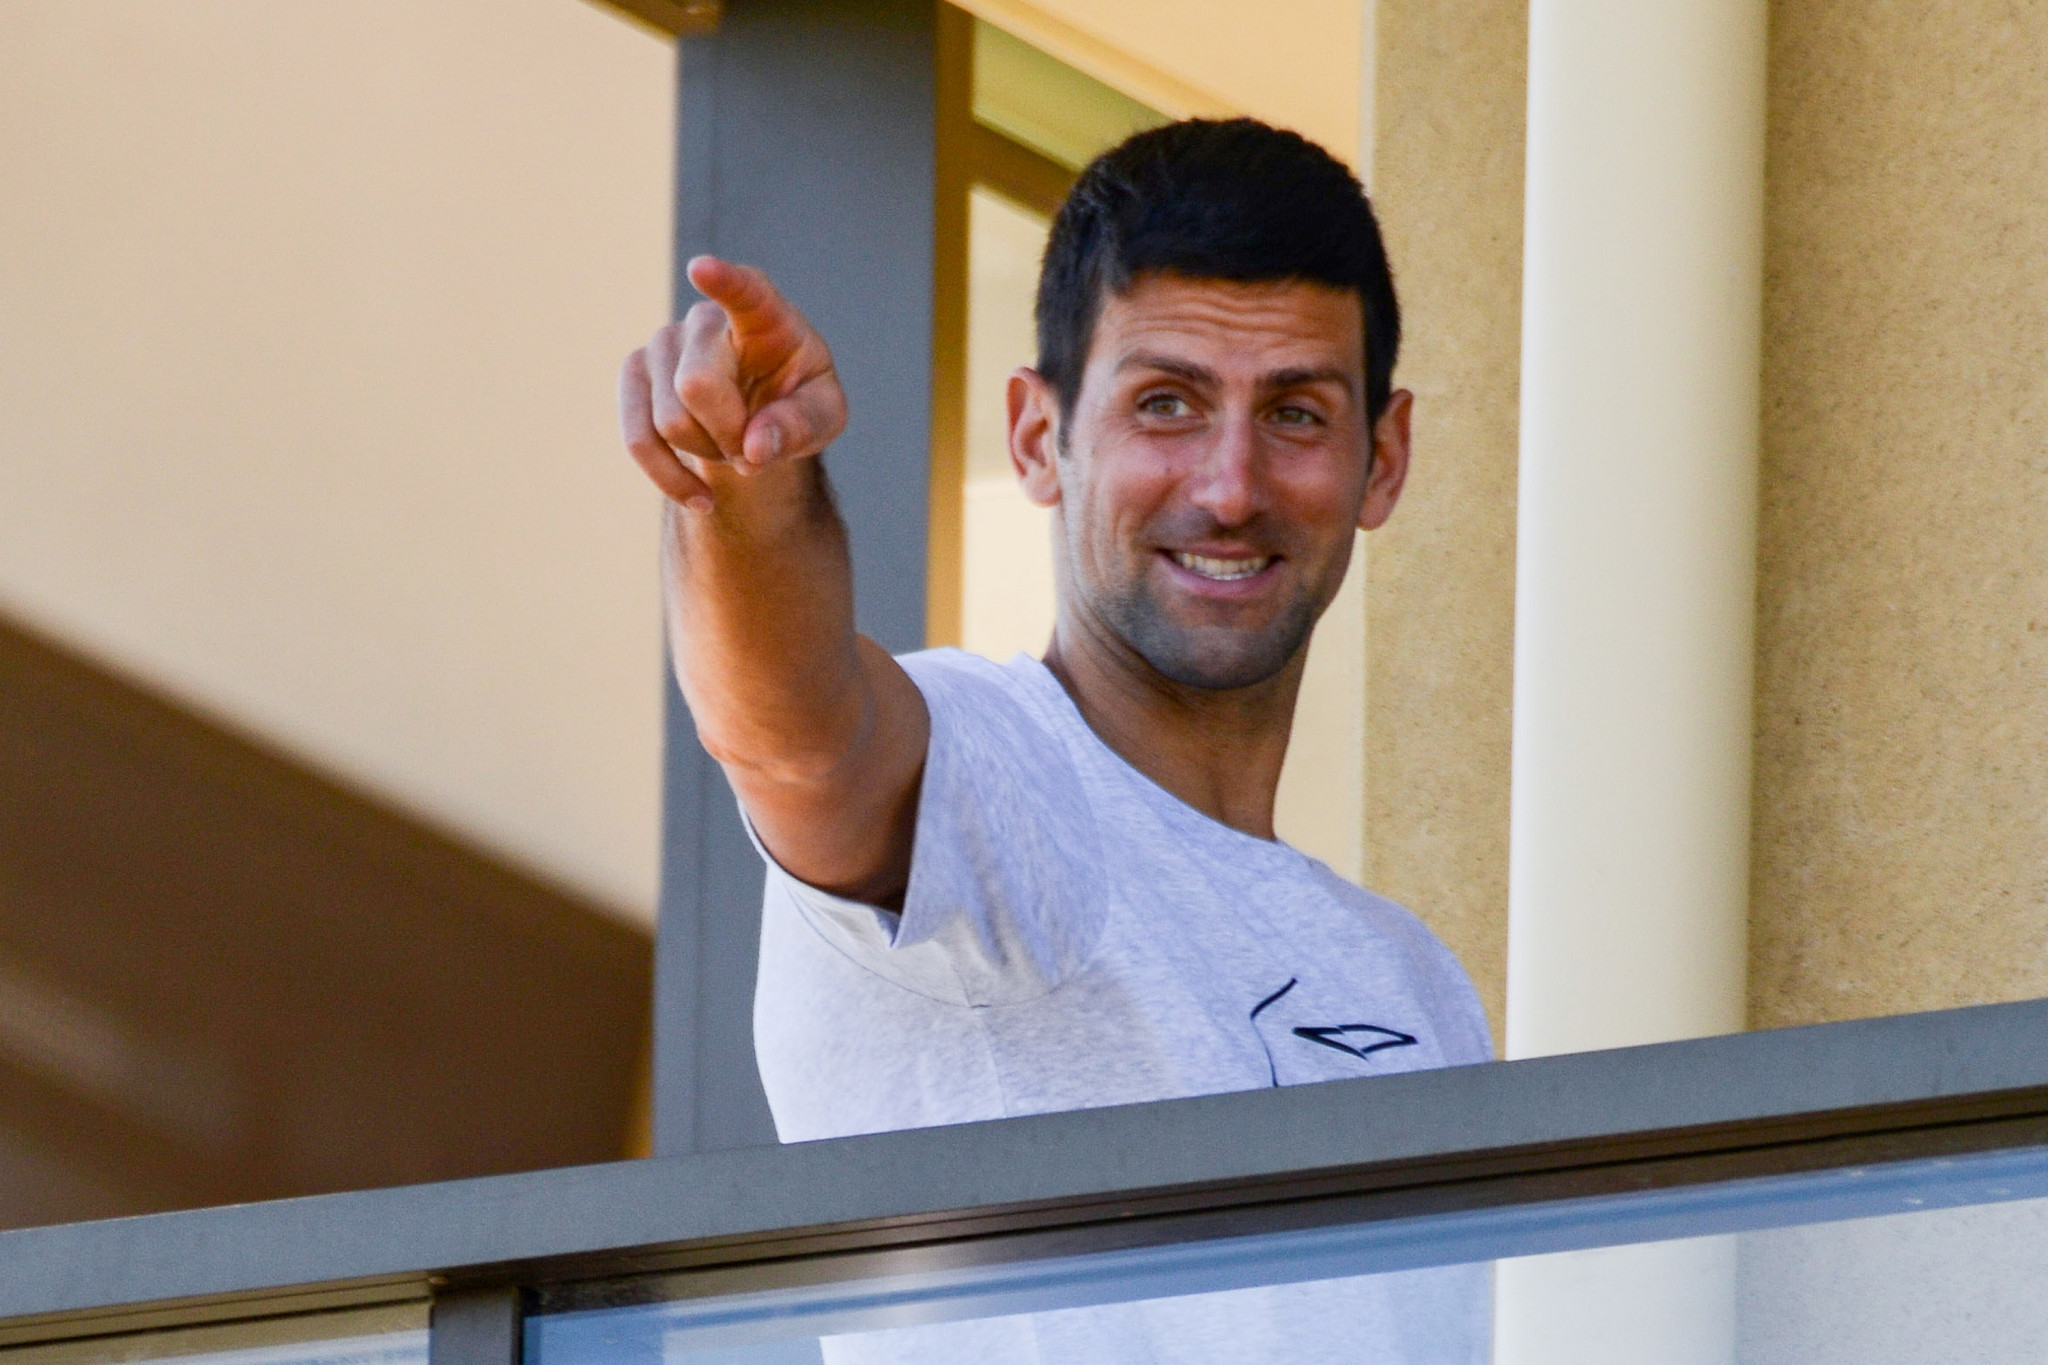 Novak Djokovic has claimed a list of demands to Australian Open organisers had "good intentions" ©Getty Images